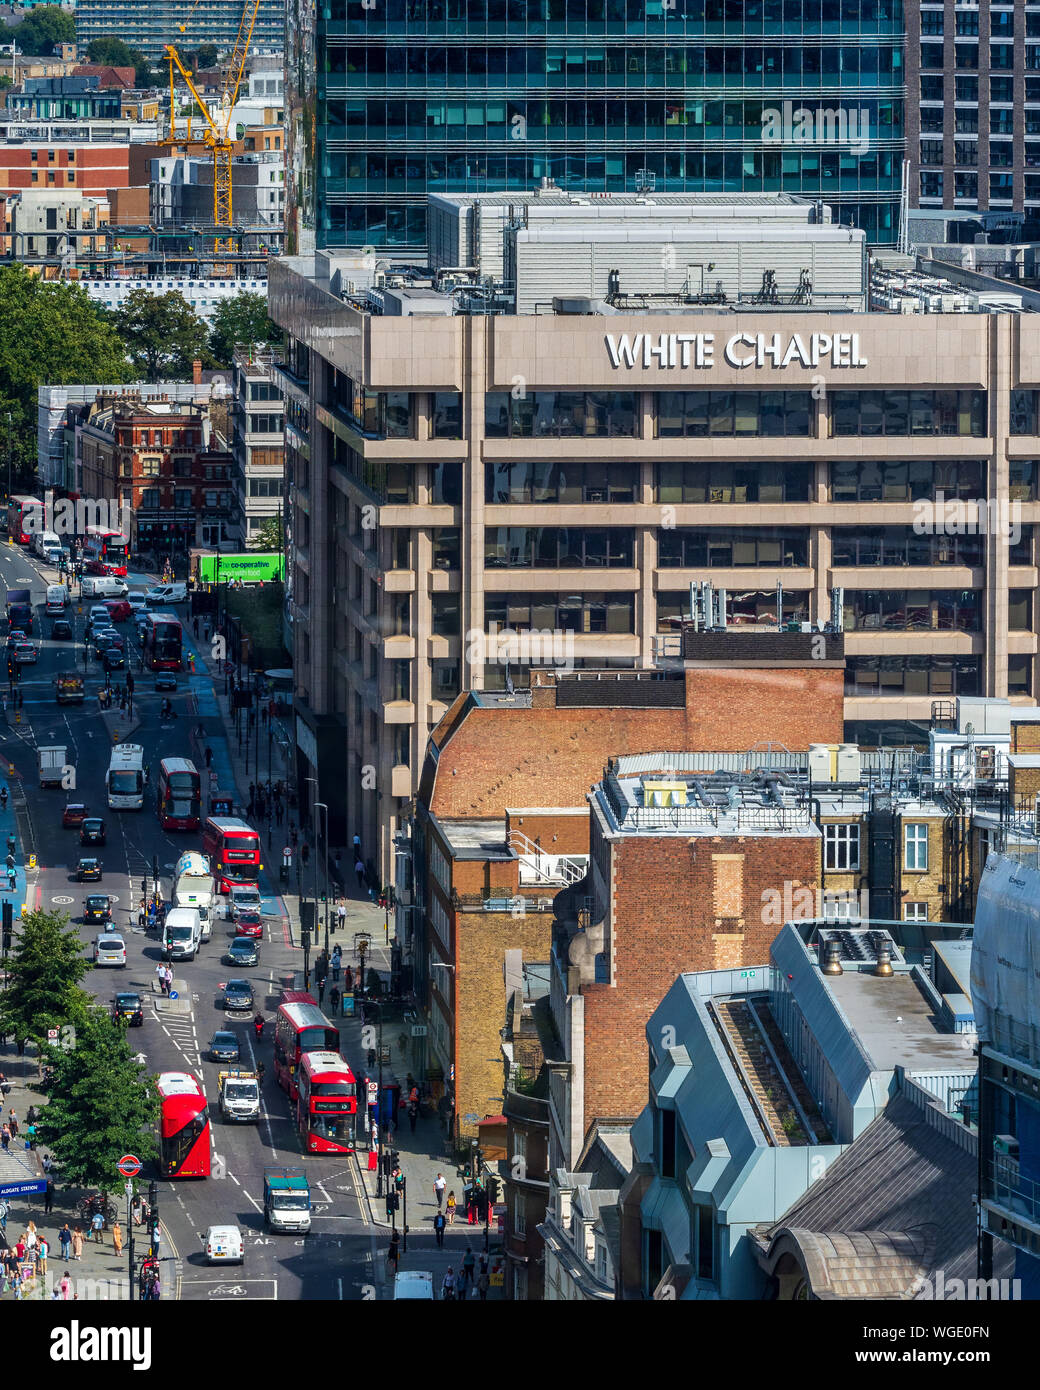 Whitechapel London - high level view of Whitechapel and Aldgate in East London Stock Photo